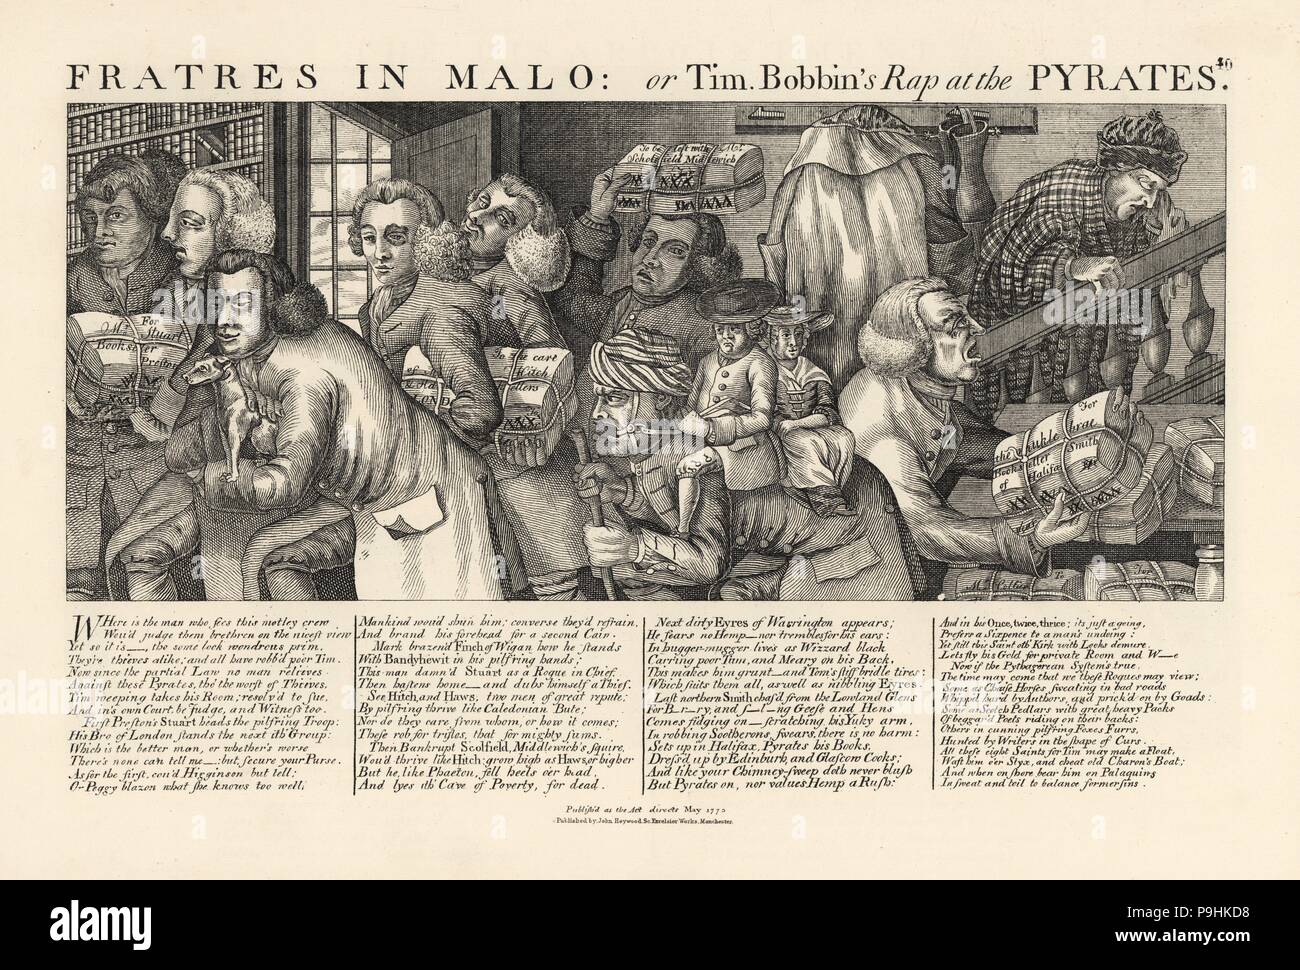 Fratres in Malo: or Tim Bobbin's Rap at the Pyrates. Gallery of rogues, thieves and cheats in the book trade of the north of England and Scotland. Copperplate engraving by Thomas Sanders after a satirical illustration by Timothy Bobbin (John Collier) from Human Passions Delineated, John Haywood, Manchester, 1773. Stock Photo